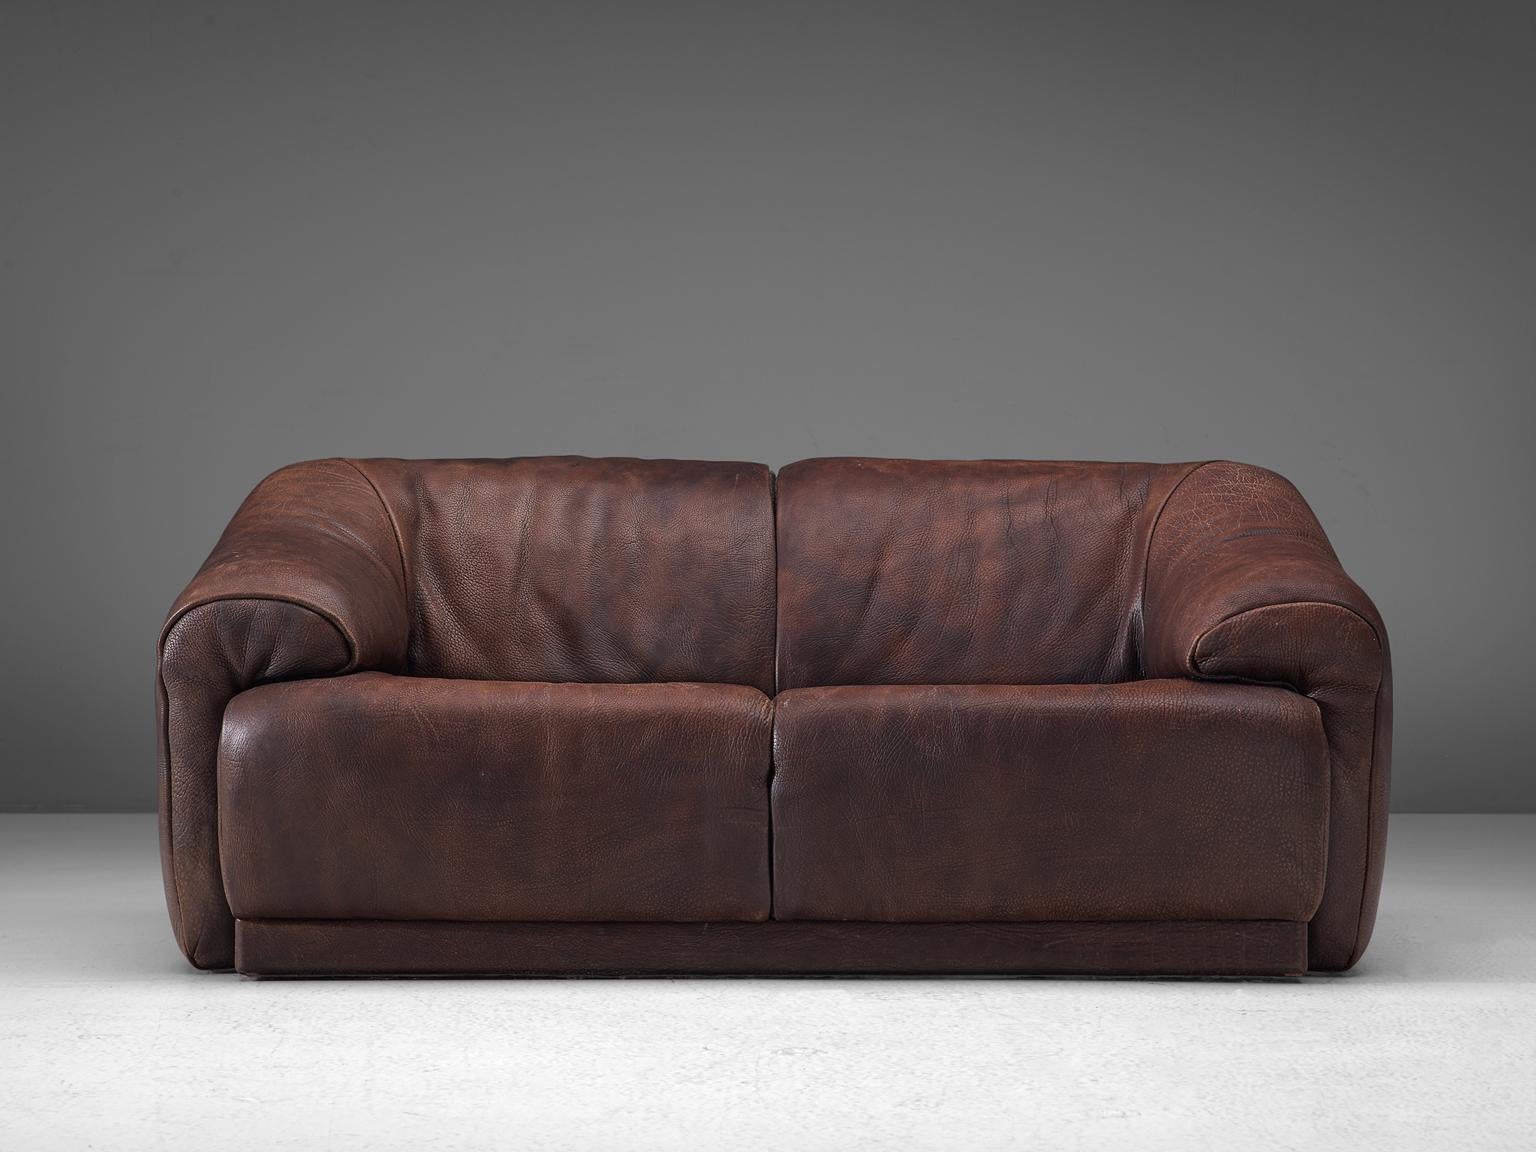 De Sede, two-seat sofa, leather, Switzerland, 1970s.

Highly comfortable sofa in light cognac leather by De Sede. The design is simplistic, yet very modern. It's an early model that is not in production anymore, and it has close similarities to the